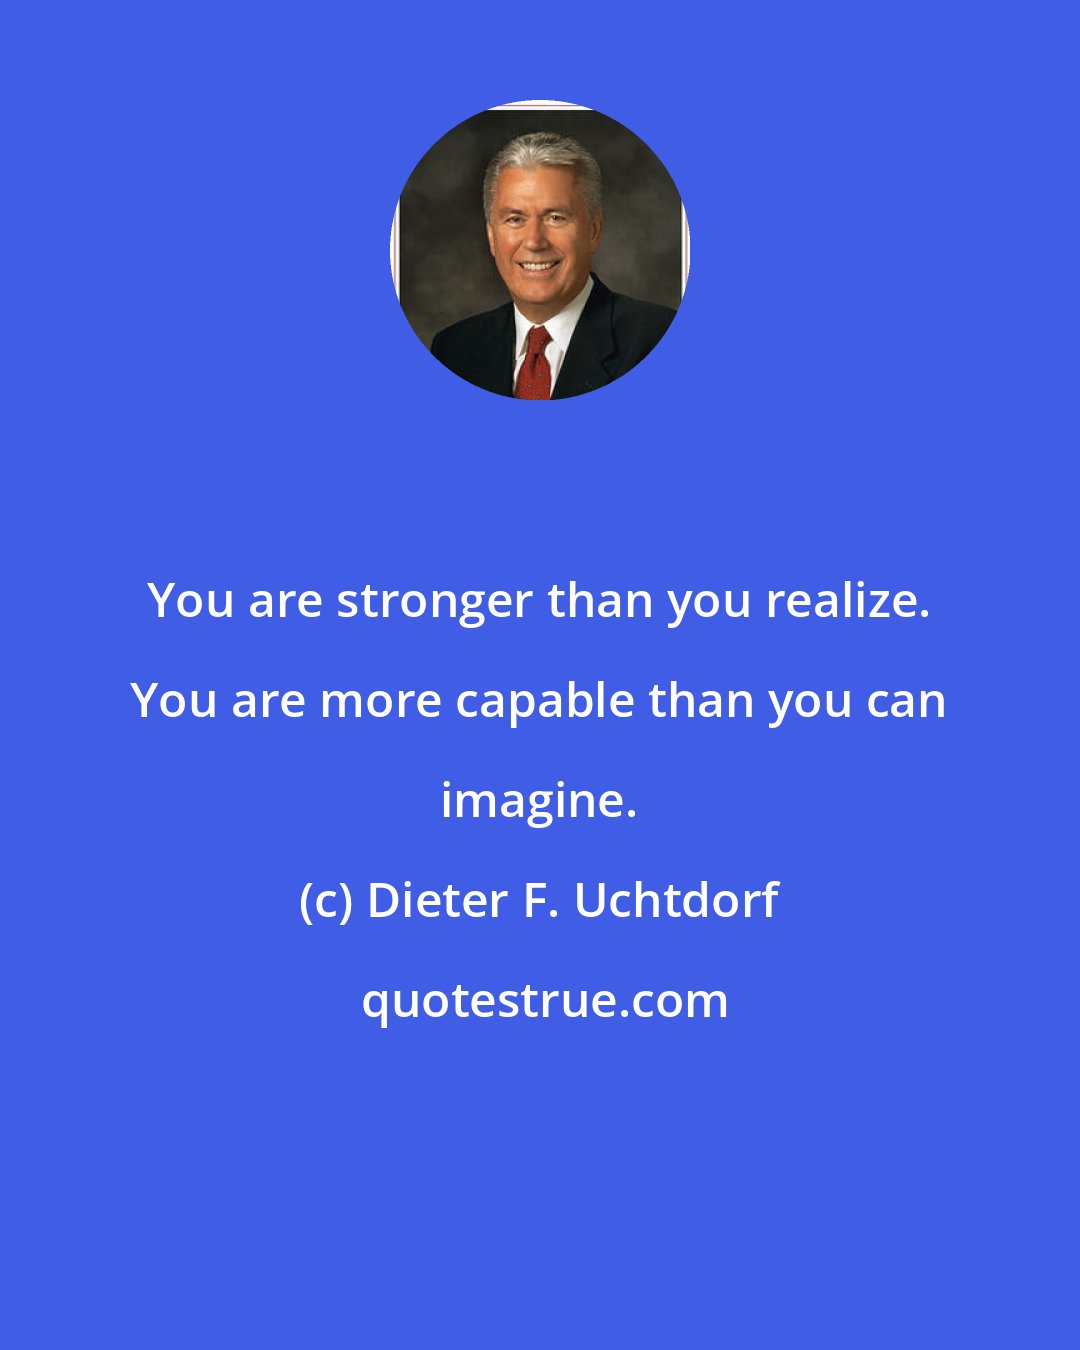 Dieter F. Uchtdorf: You are stronger than you realize. You are more capable than you can imagine.